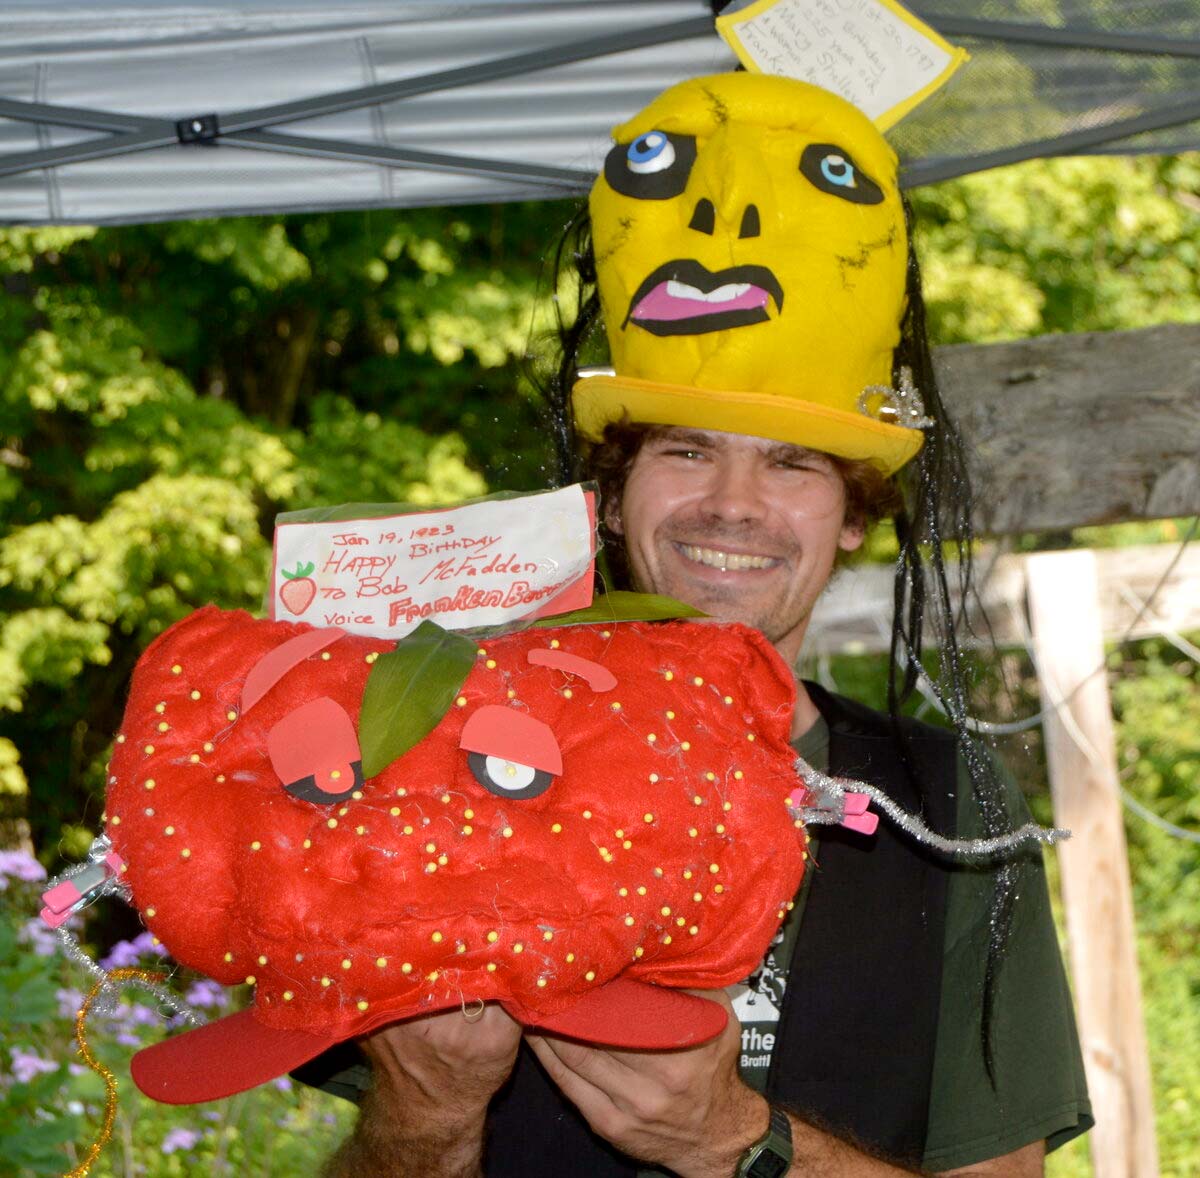 Patrick Gardner, holding his Franken Berry hat dedicated to the voice actor Bob McFadden, while wearing his Frankenstein hat, with a dedication to the author Mary Shelley.